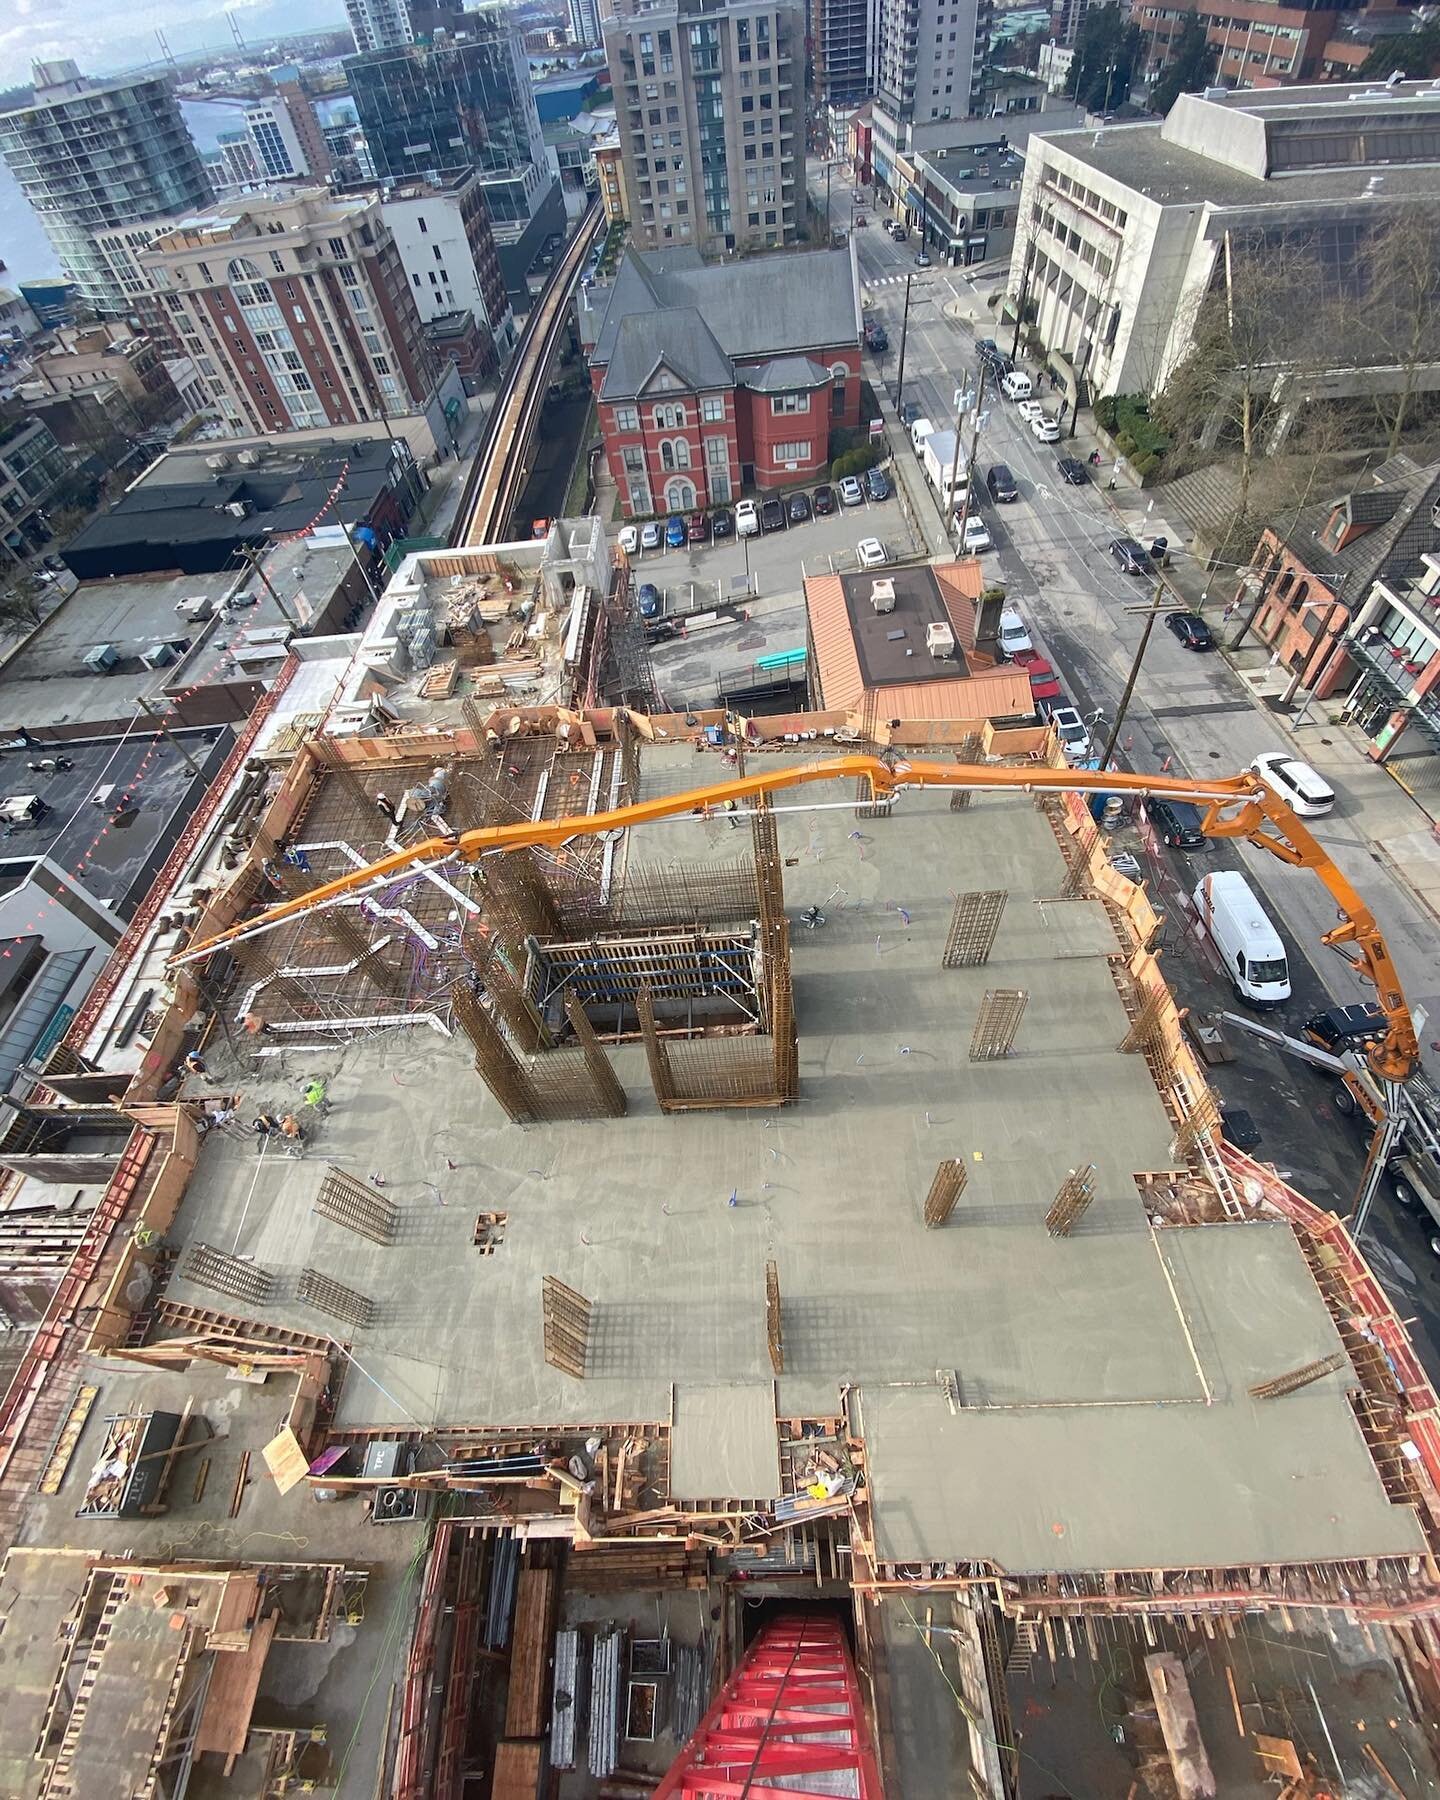 TBT: Back to March 2022 working at 618 Carnarvon St, New Westminster for @twopillarsgroup 

#concretepumping #56mpump #concrete #construction #teamwork #concreteplacing #concretefinishing #newwest